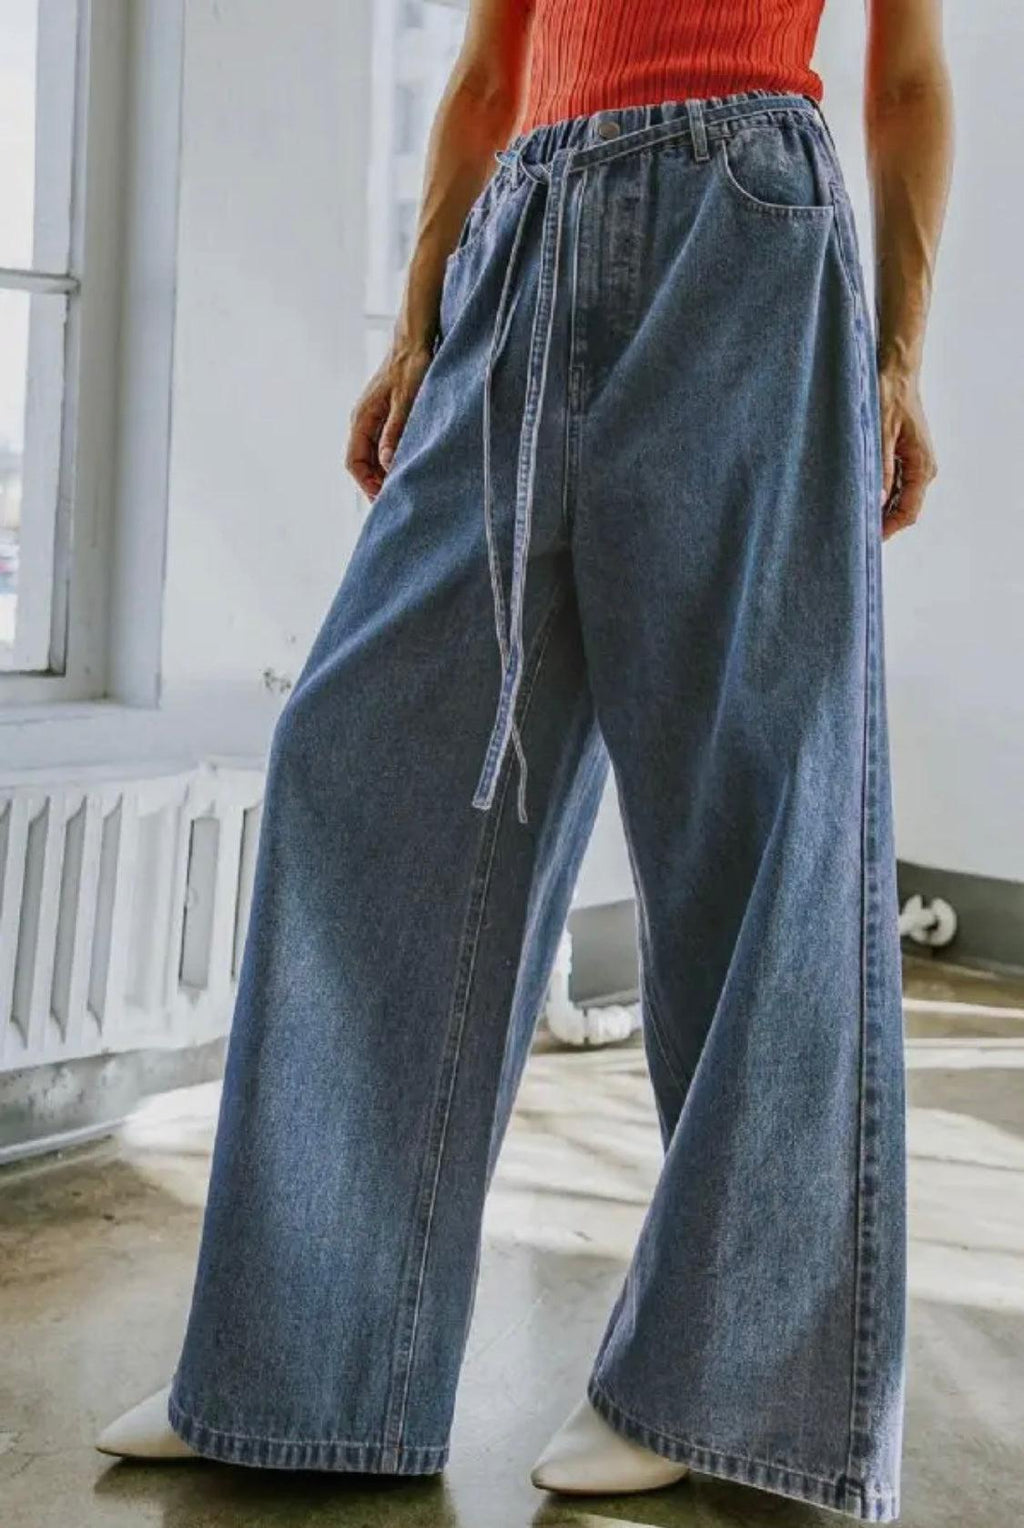 Relaxed Denim Jeans-170 Jeans-High Rise Jeans, High Rise Wide Leg Jeans, High Waisted Jeans, Jeans, Wide Leg Jeans-[option4]-[option5]-[option6]-Womens-USA-Clothing-Boutique-Shop-Online-Clothes Minded